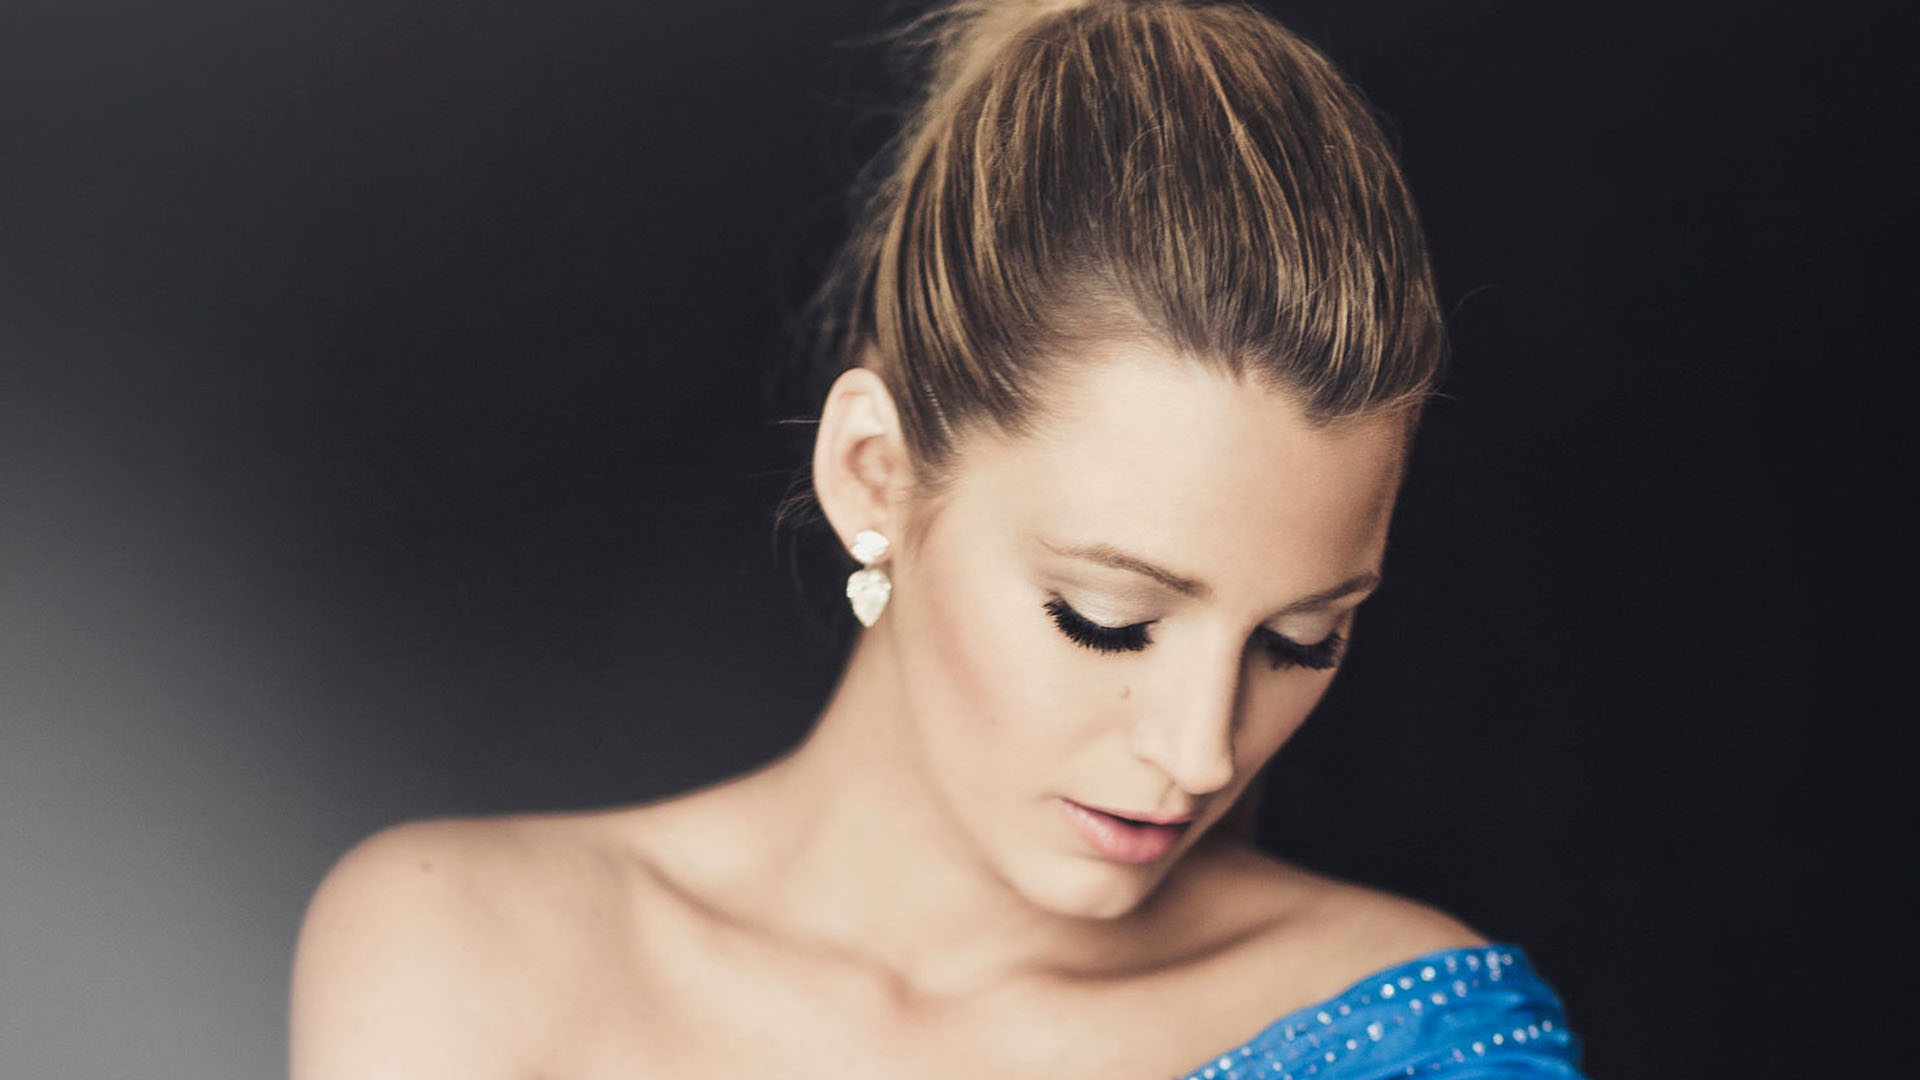 Blake Lively Is Wearing Sky Blue Dress With Cute Pose 2K Celebrities